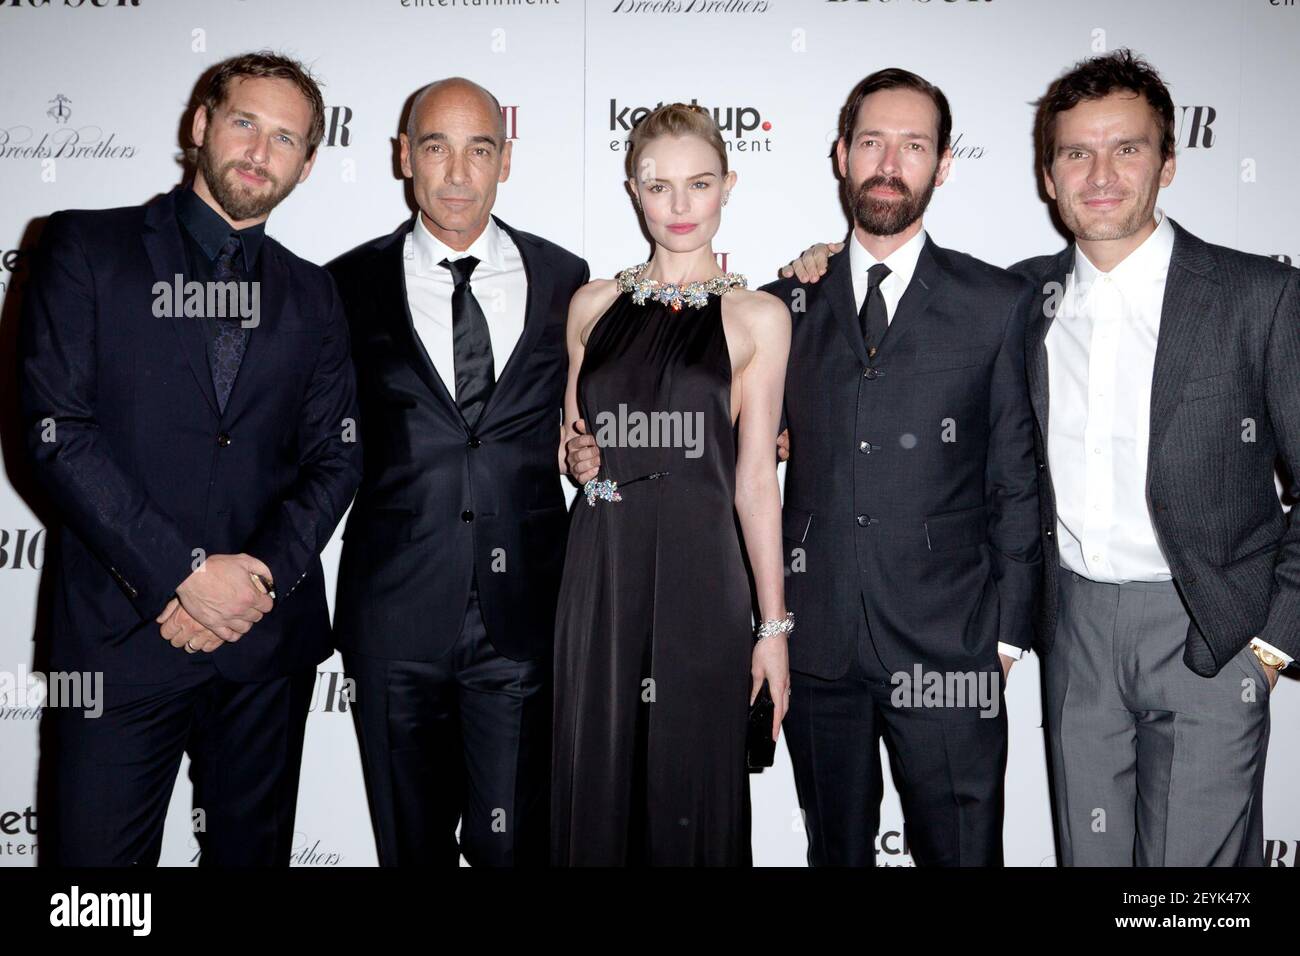 L to R) Josh Lucas, Jean Marc-Barr, Kate Bosworth, Michael Polish,  Balthazar Getty attending the New York Premiere of BIG SUR at the Sunshine  Landmark Theatre New York, NY on Oct. 28,